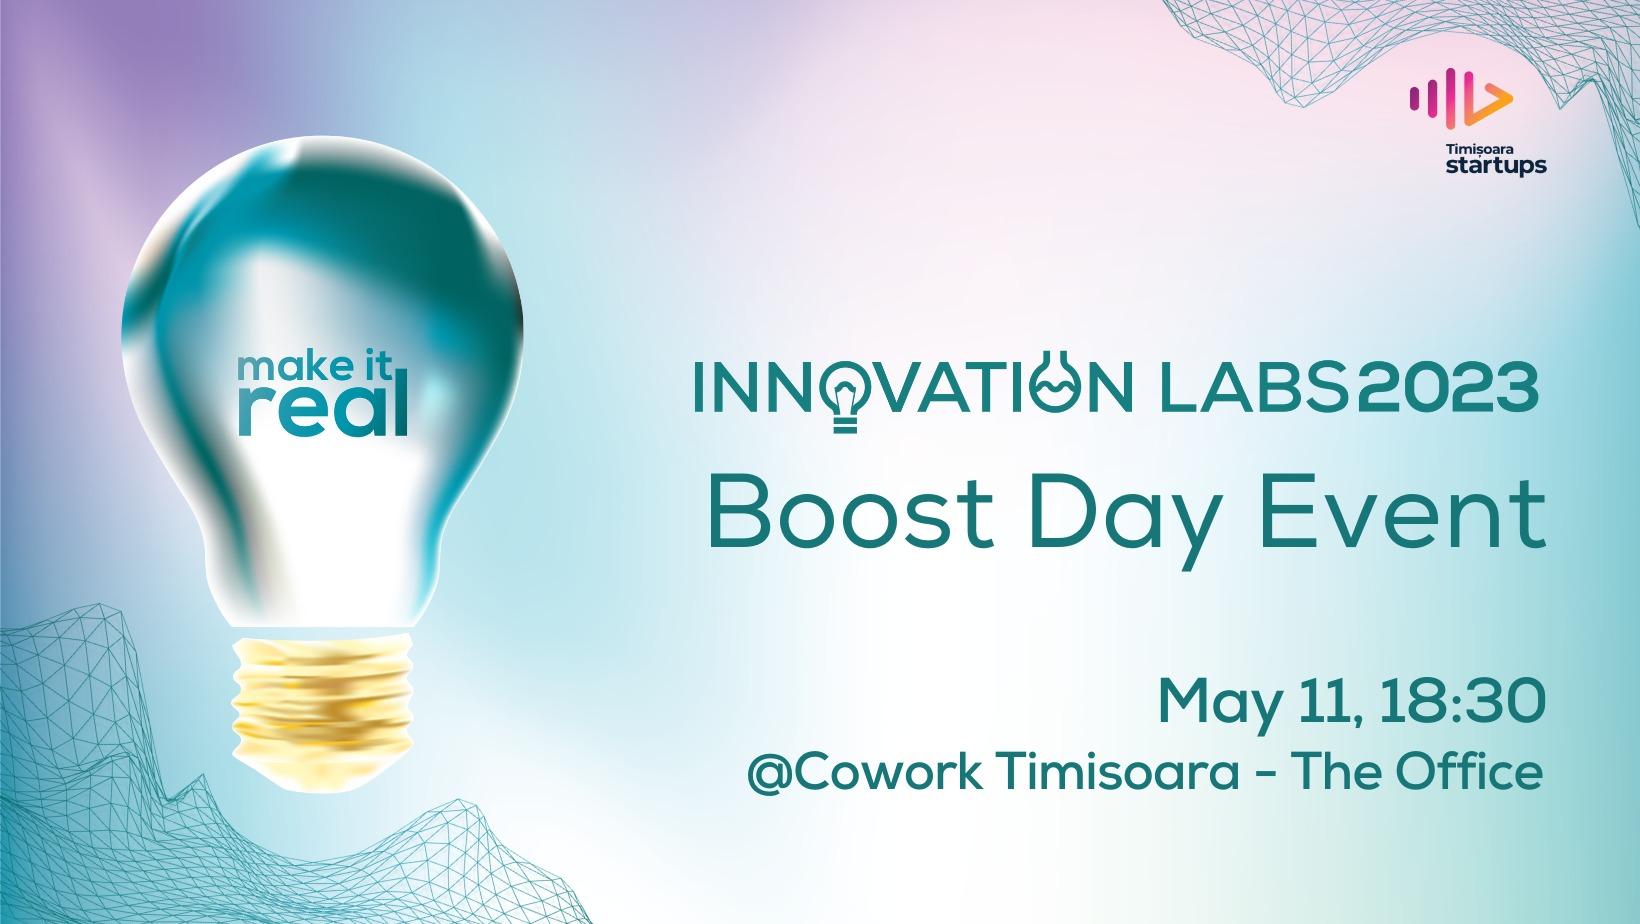 Boost Day Event - Innovation Labs 2023 Timișoara